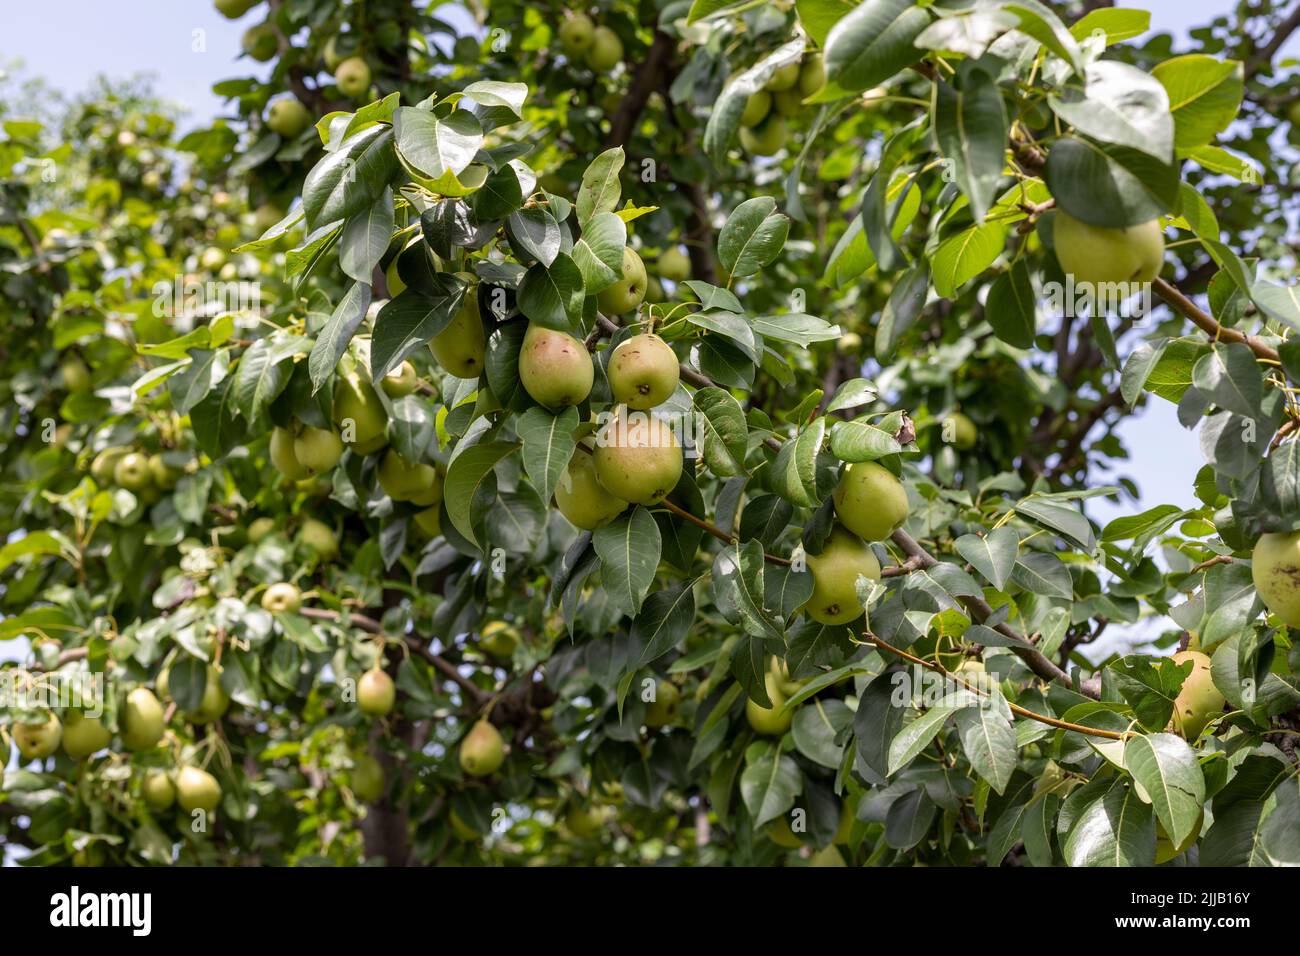 Pear fruit tree with pears in the garden Stock Photo